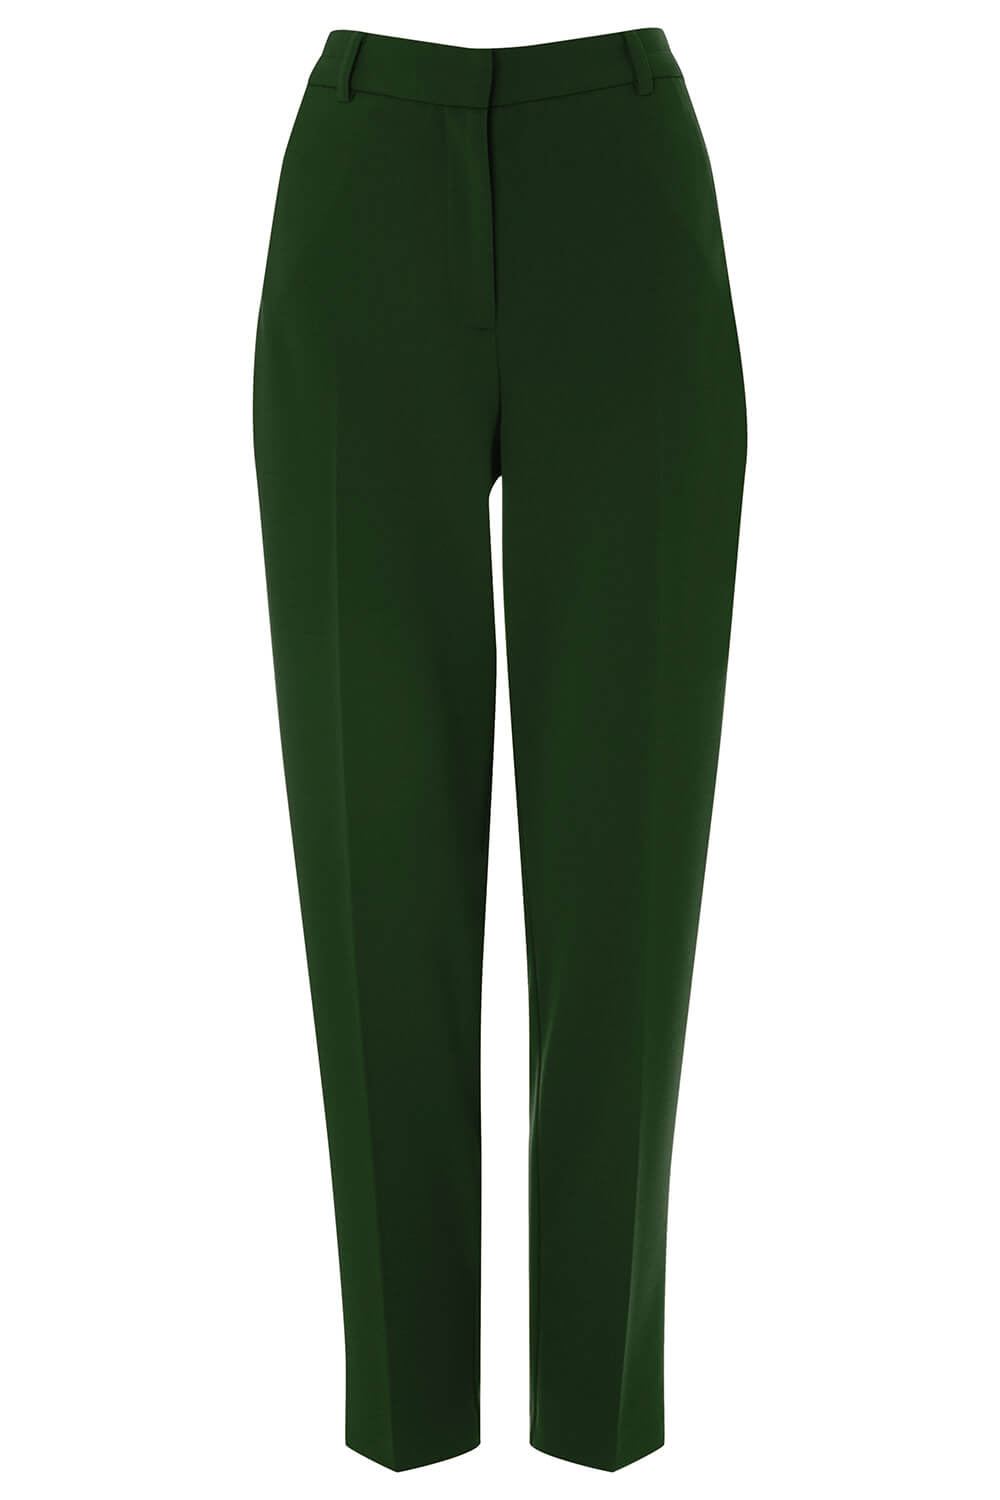 Forest  Straight Leg Stretch Trouser, Image 4 of 4